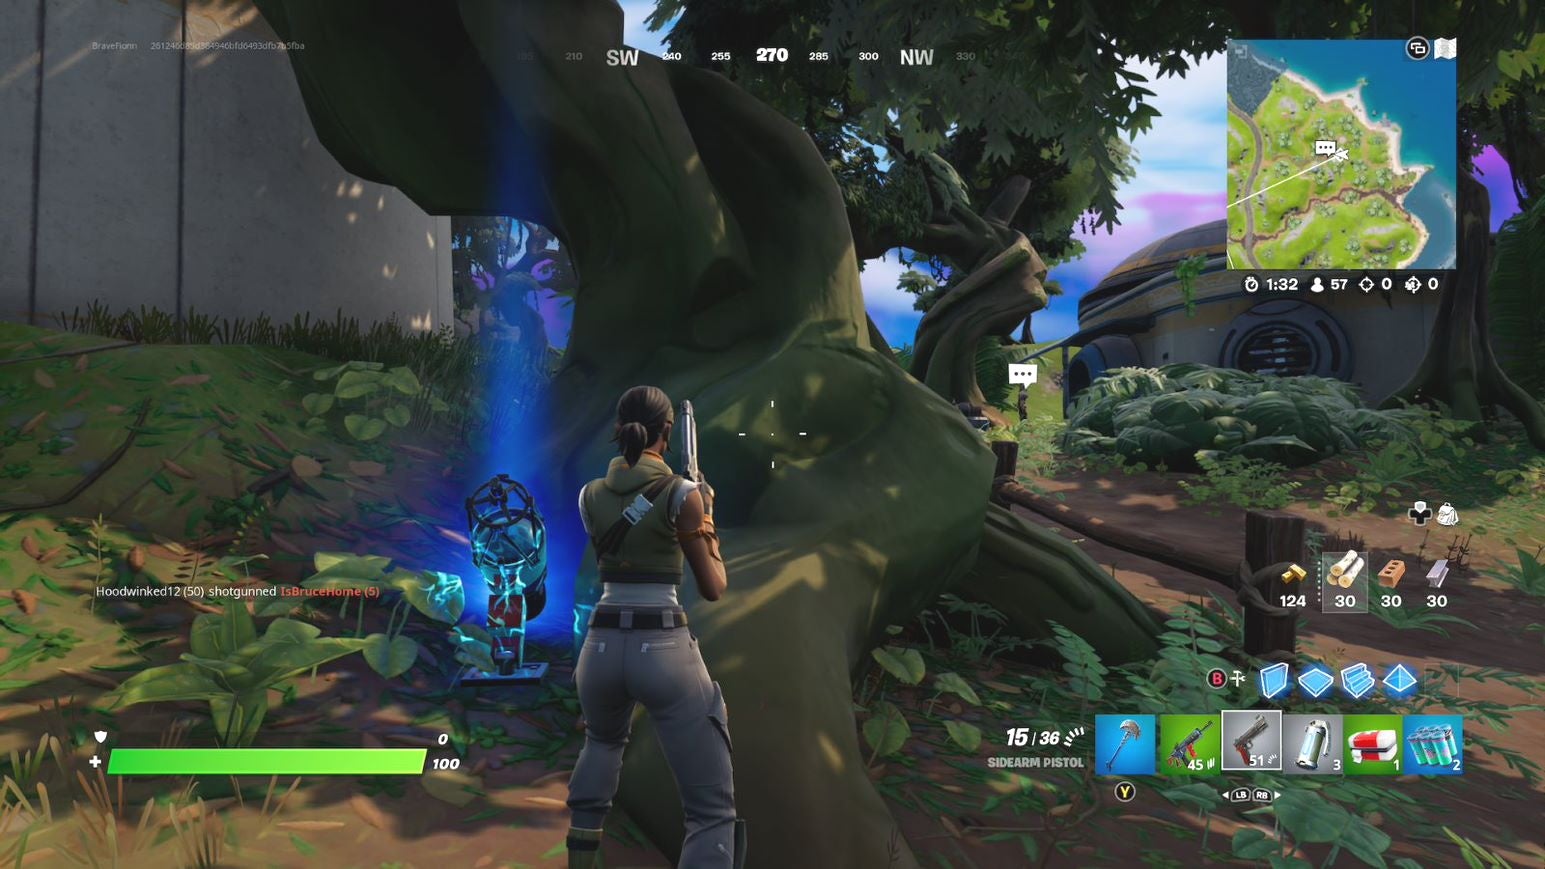 Image for Fortnite telescope locations and how to collect telescope parts